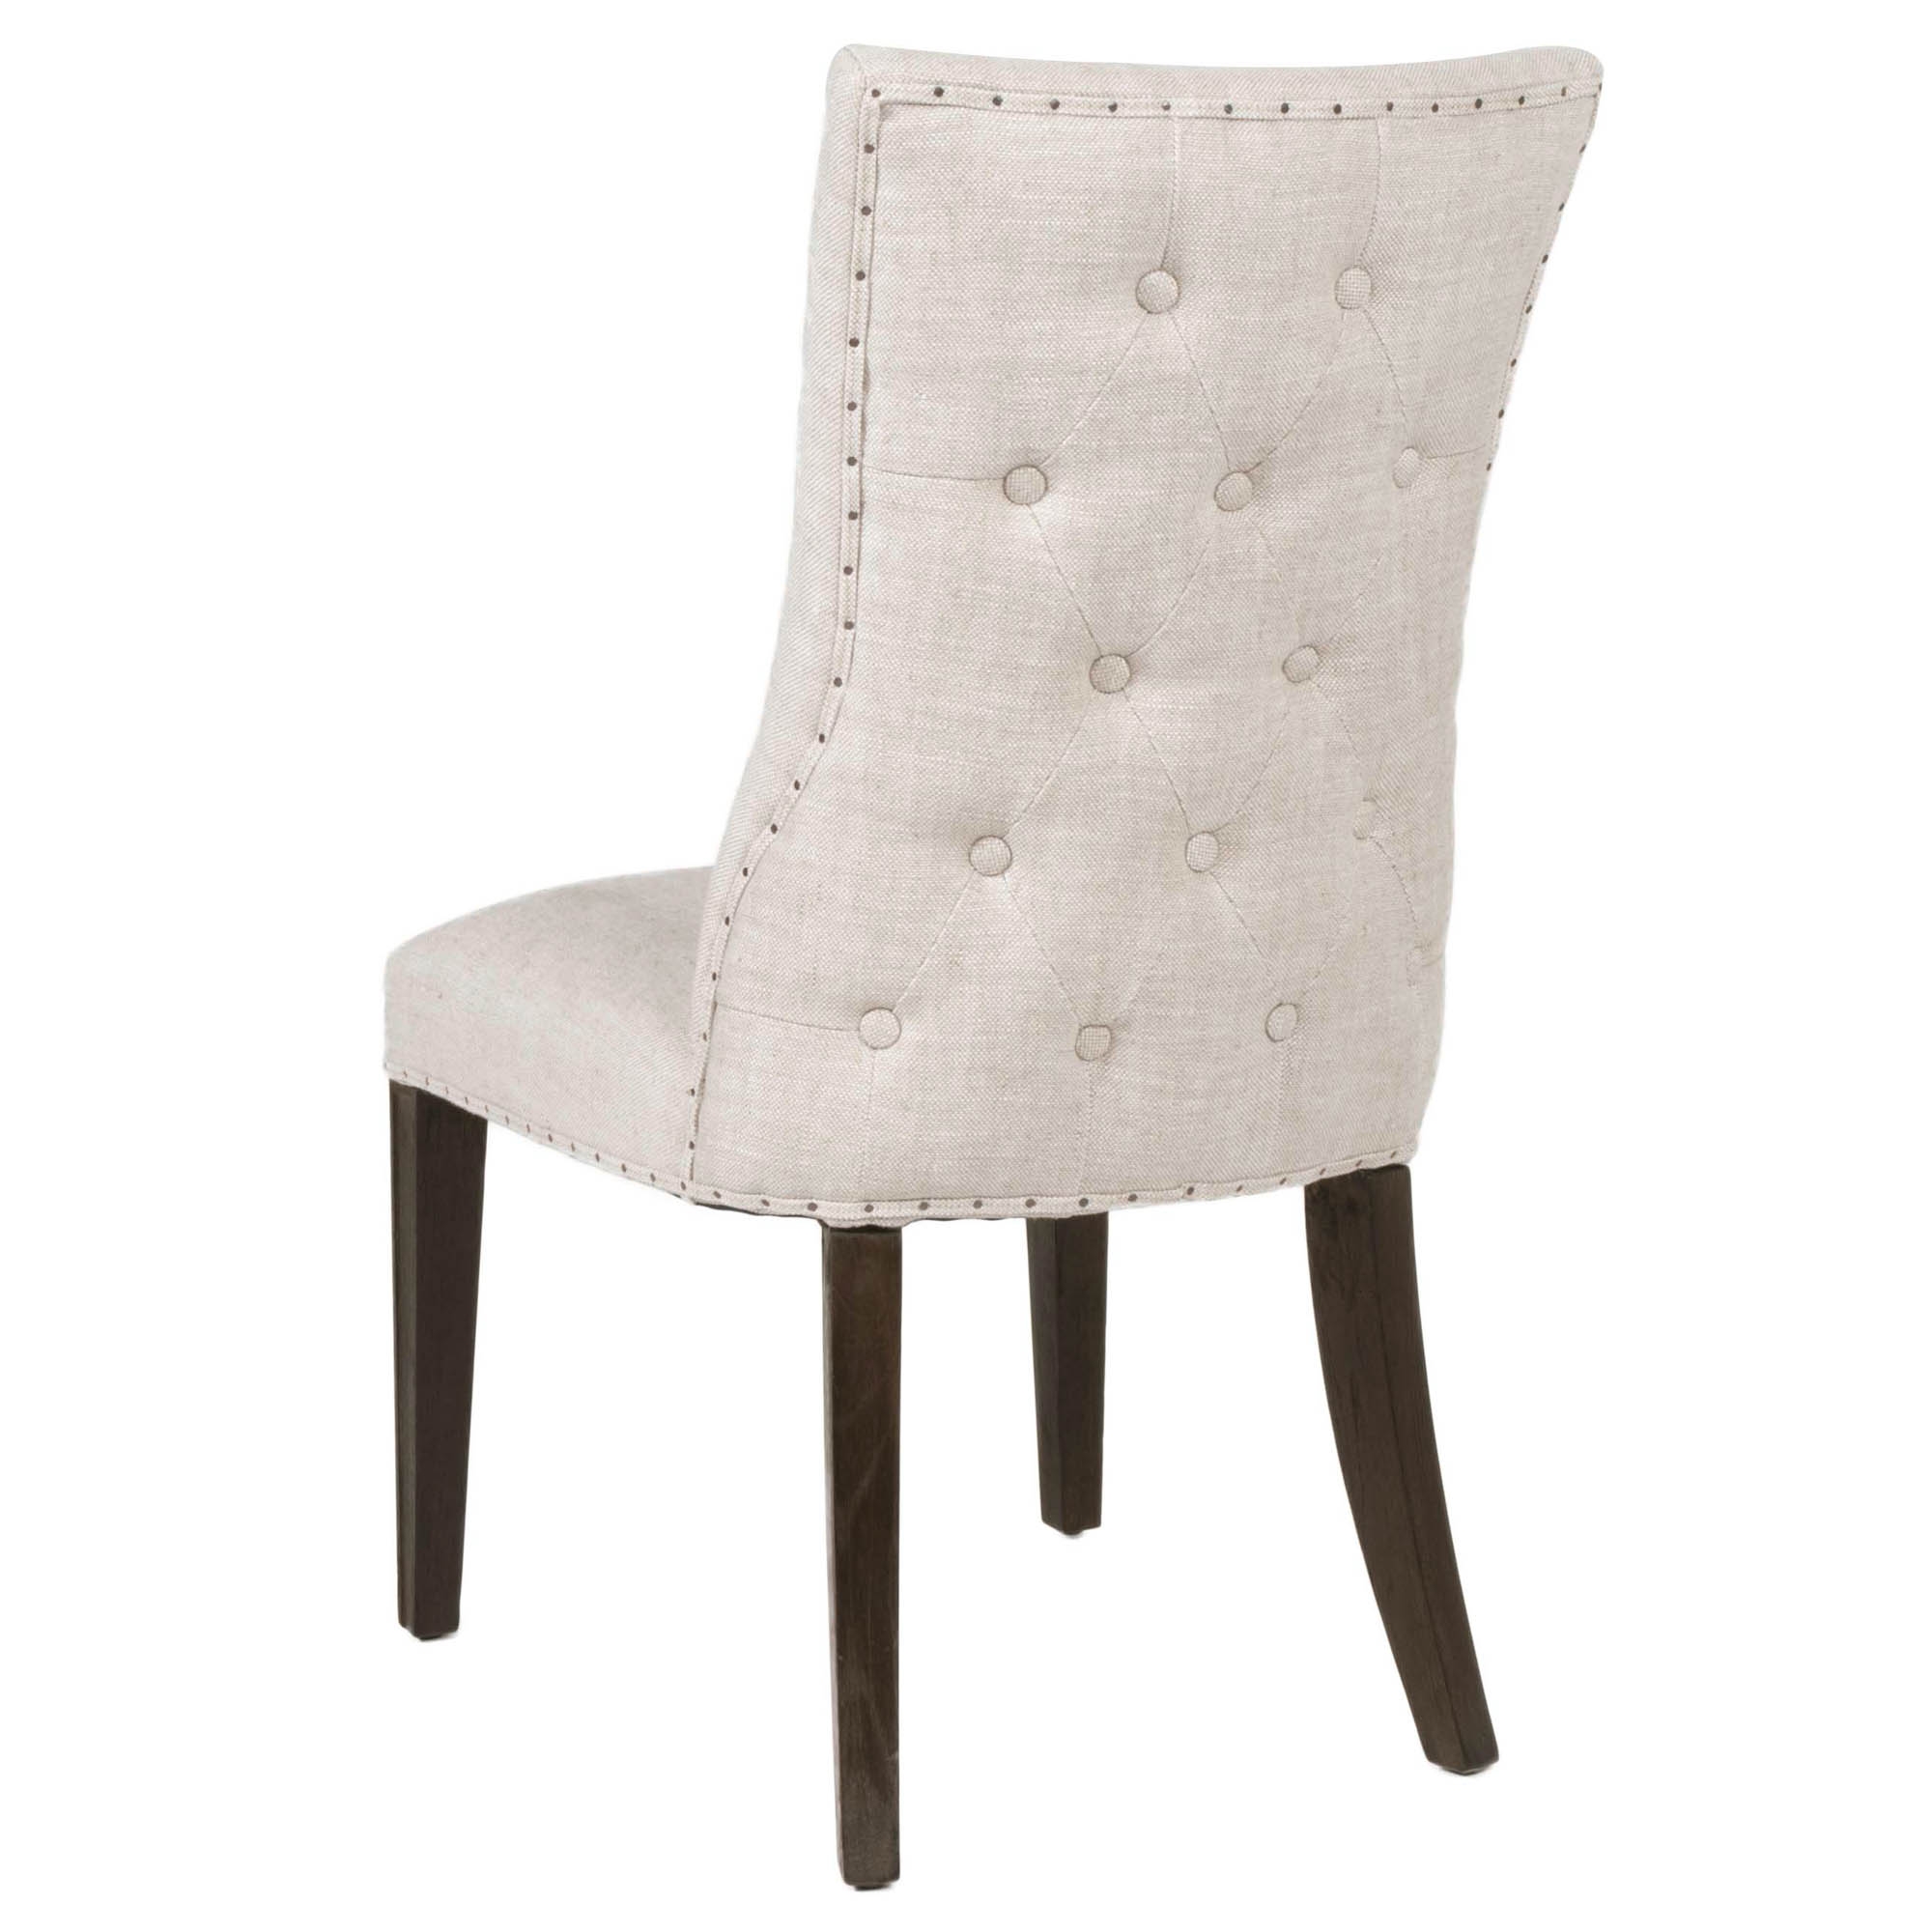 Lourdes Dining Chair, Set of 2 - Image 3